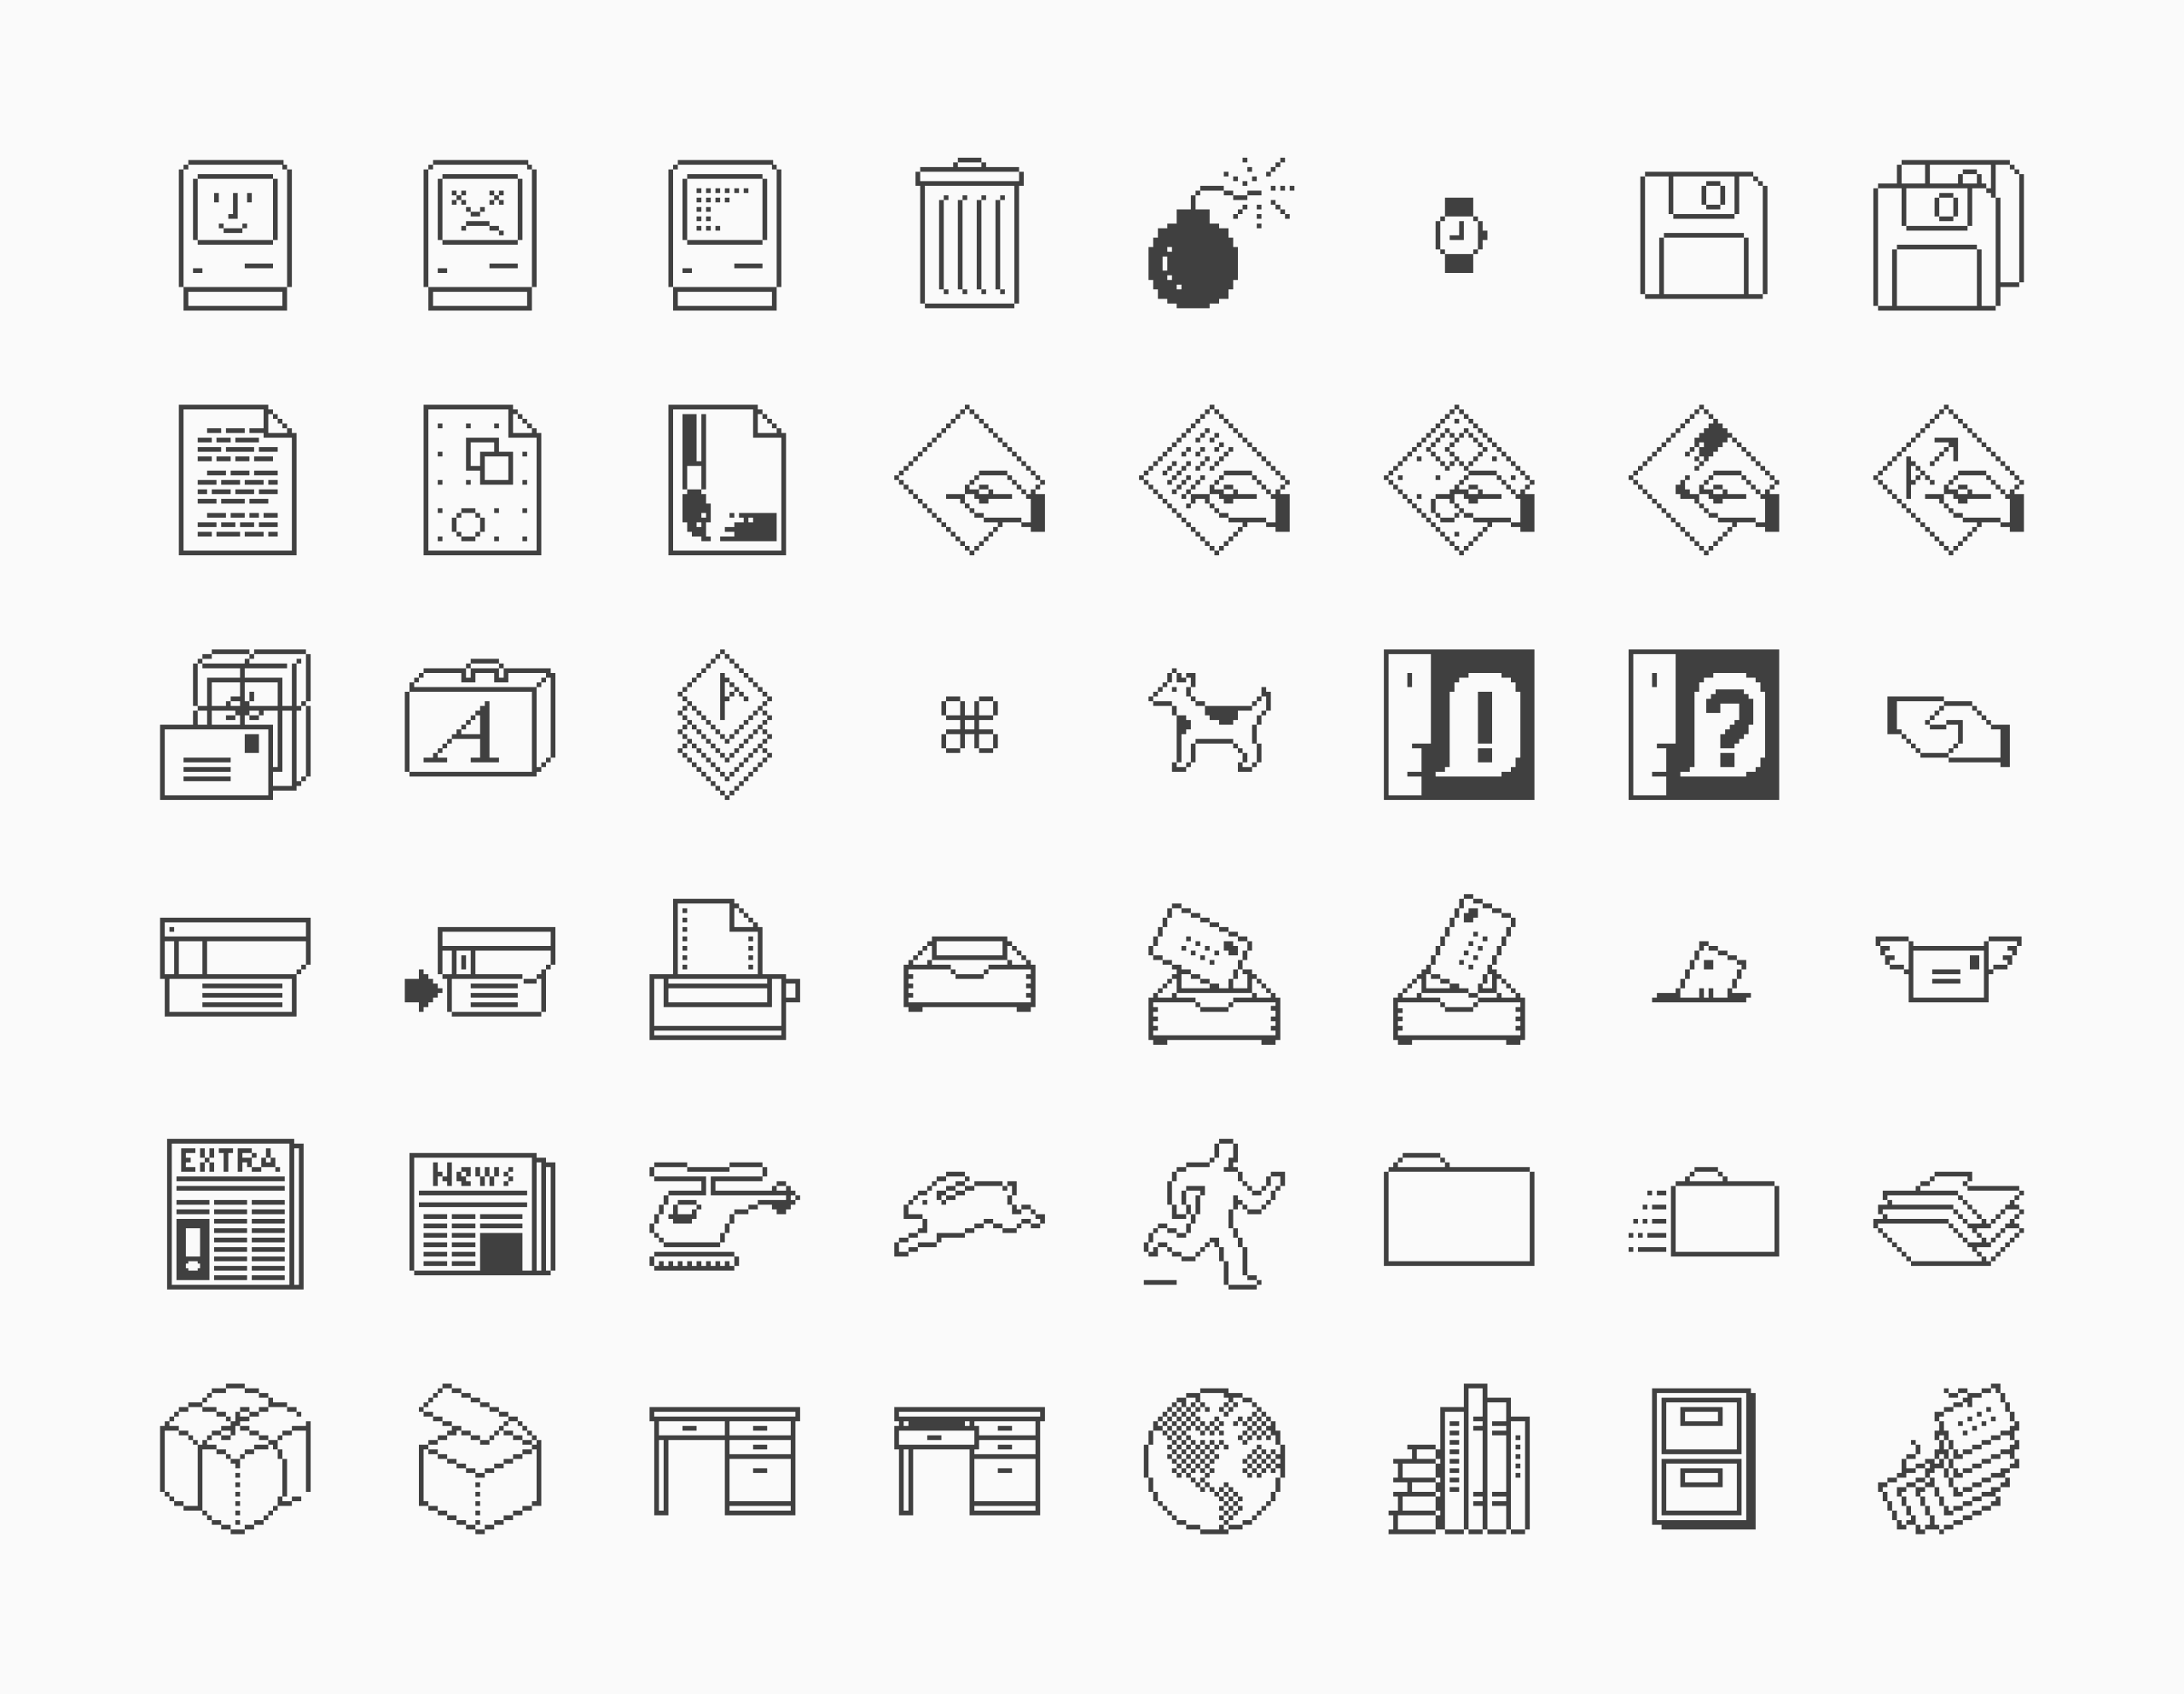 An image with overview of the 48 retro Macintosh icons